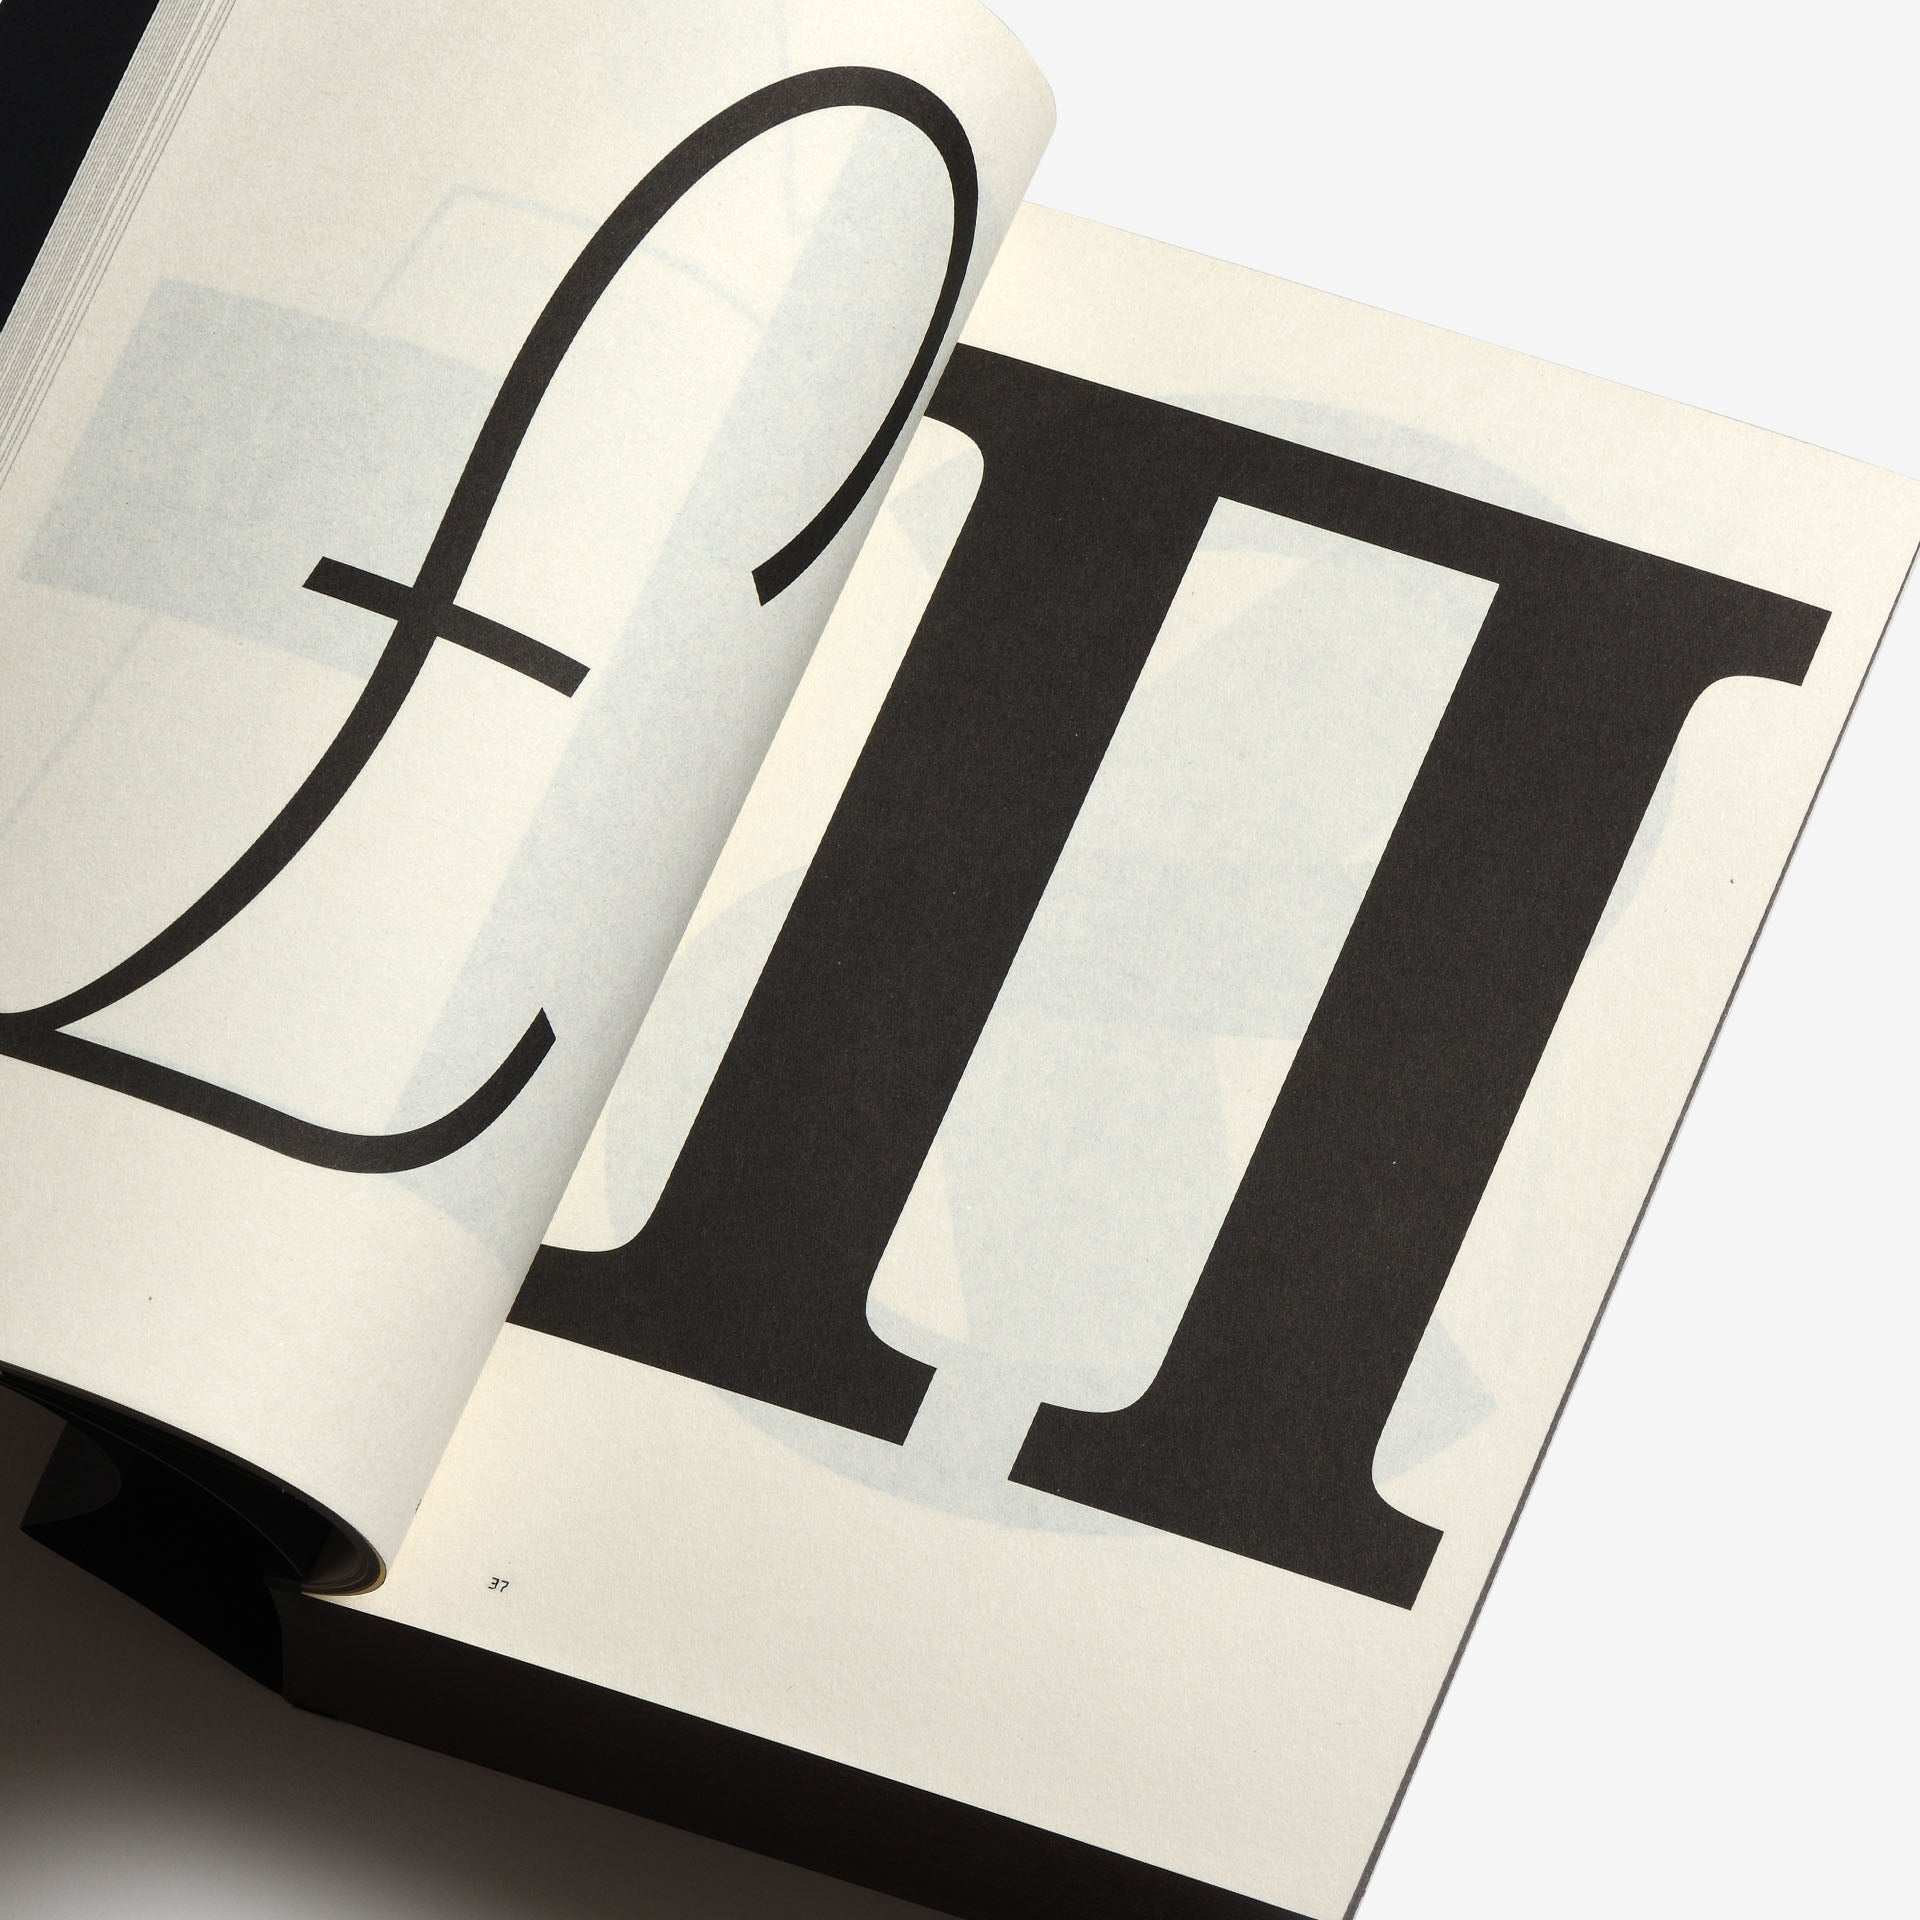 Kris Sowersby: The Art of Letters